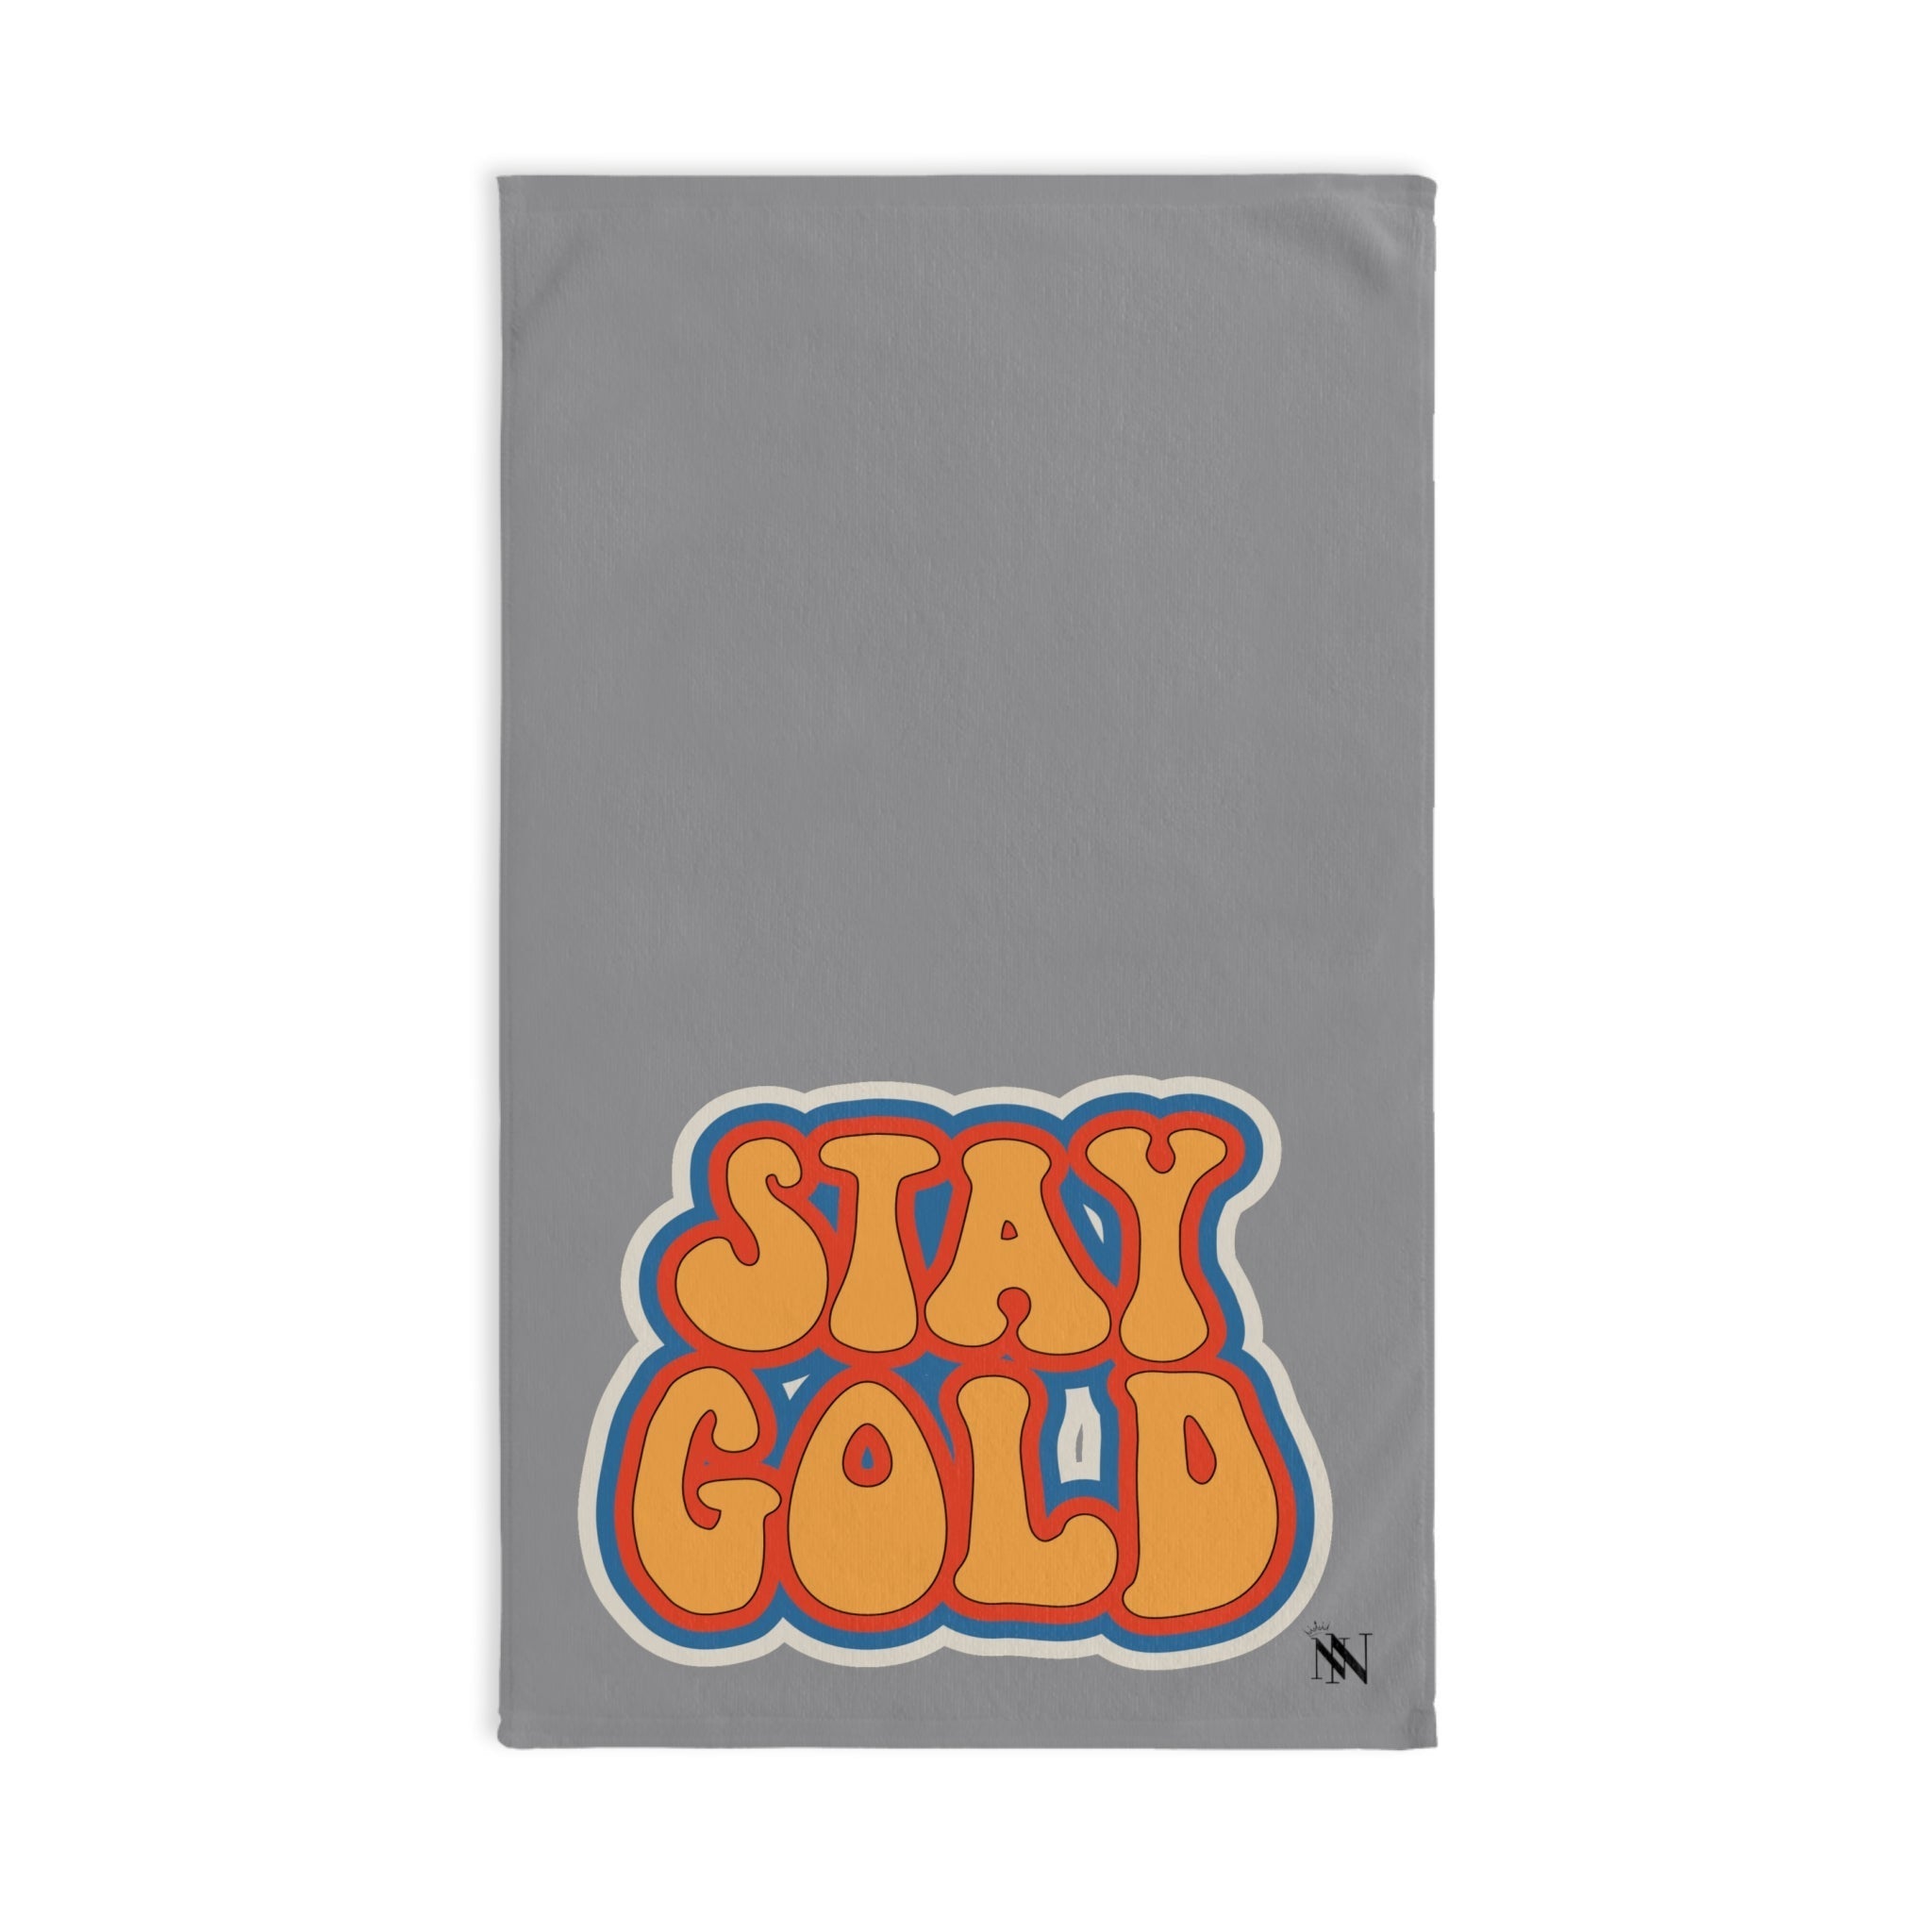 Stay Gold Retro Grey | Anniversary Wedding, Christmas, Valentines Day, Birthday Gifts for Him, Her, Romantic Gifts for Wife, Girlfriend, Couples Gifts for Boyfriend, Husband NECTAR NAPKINS